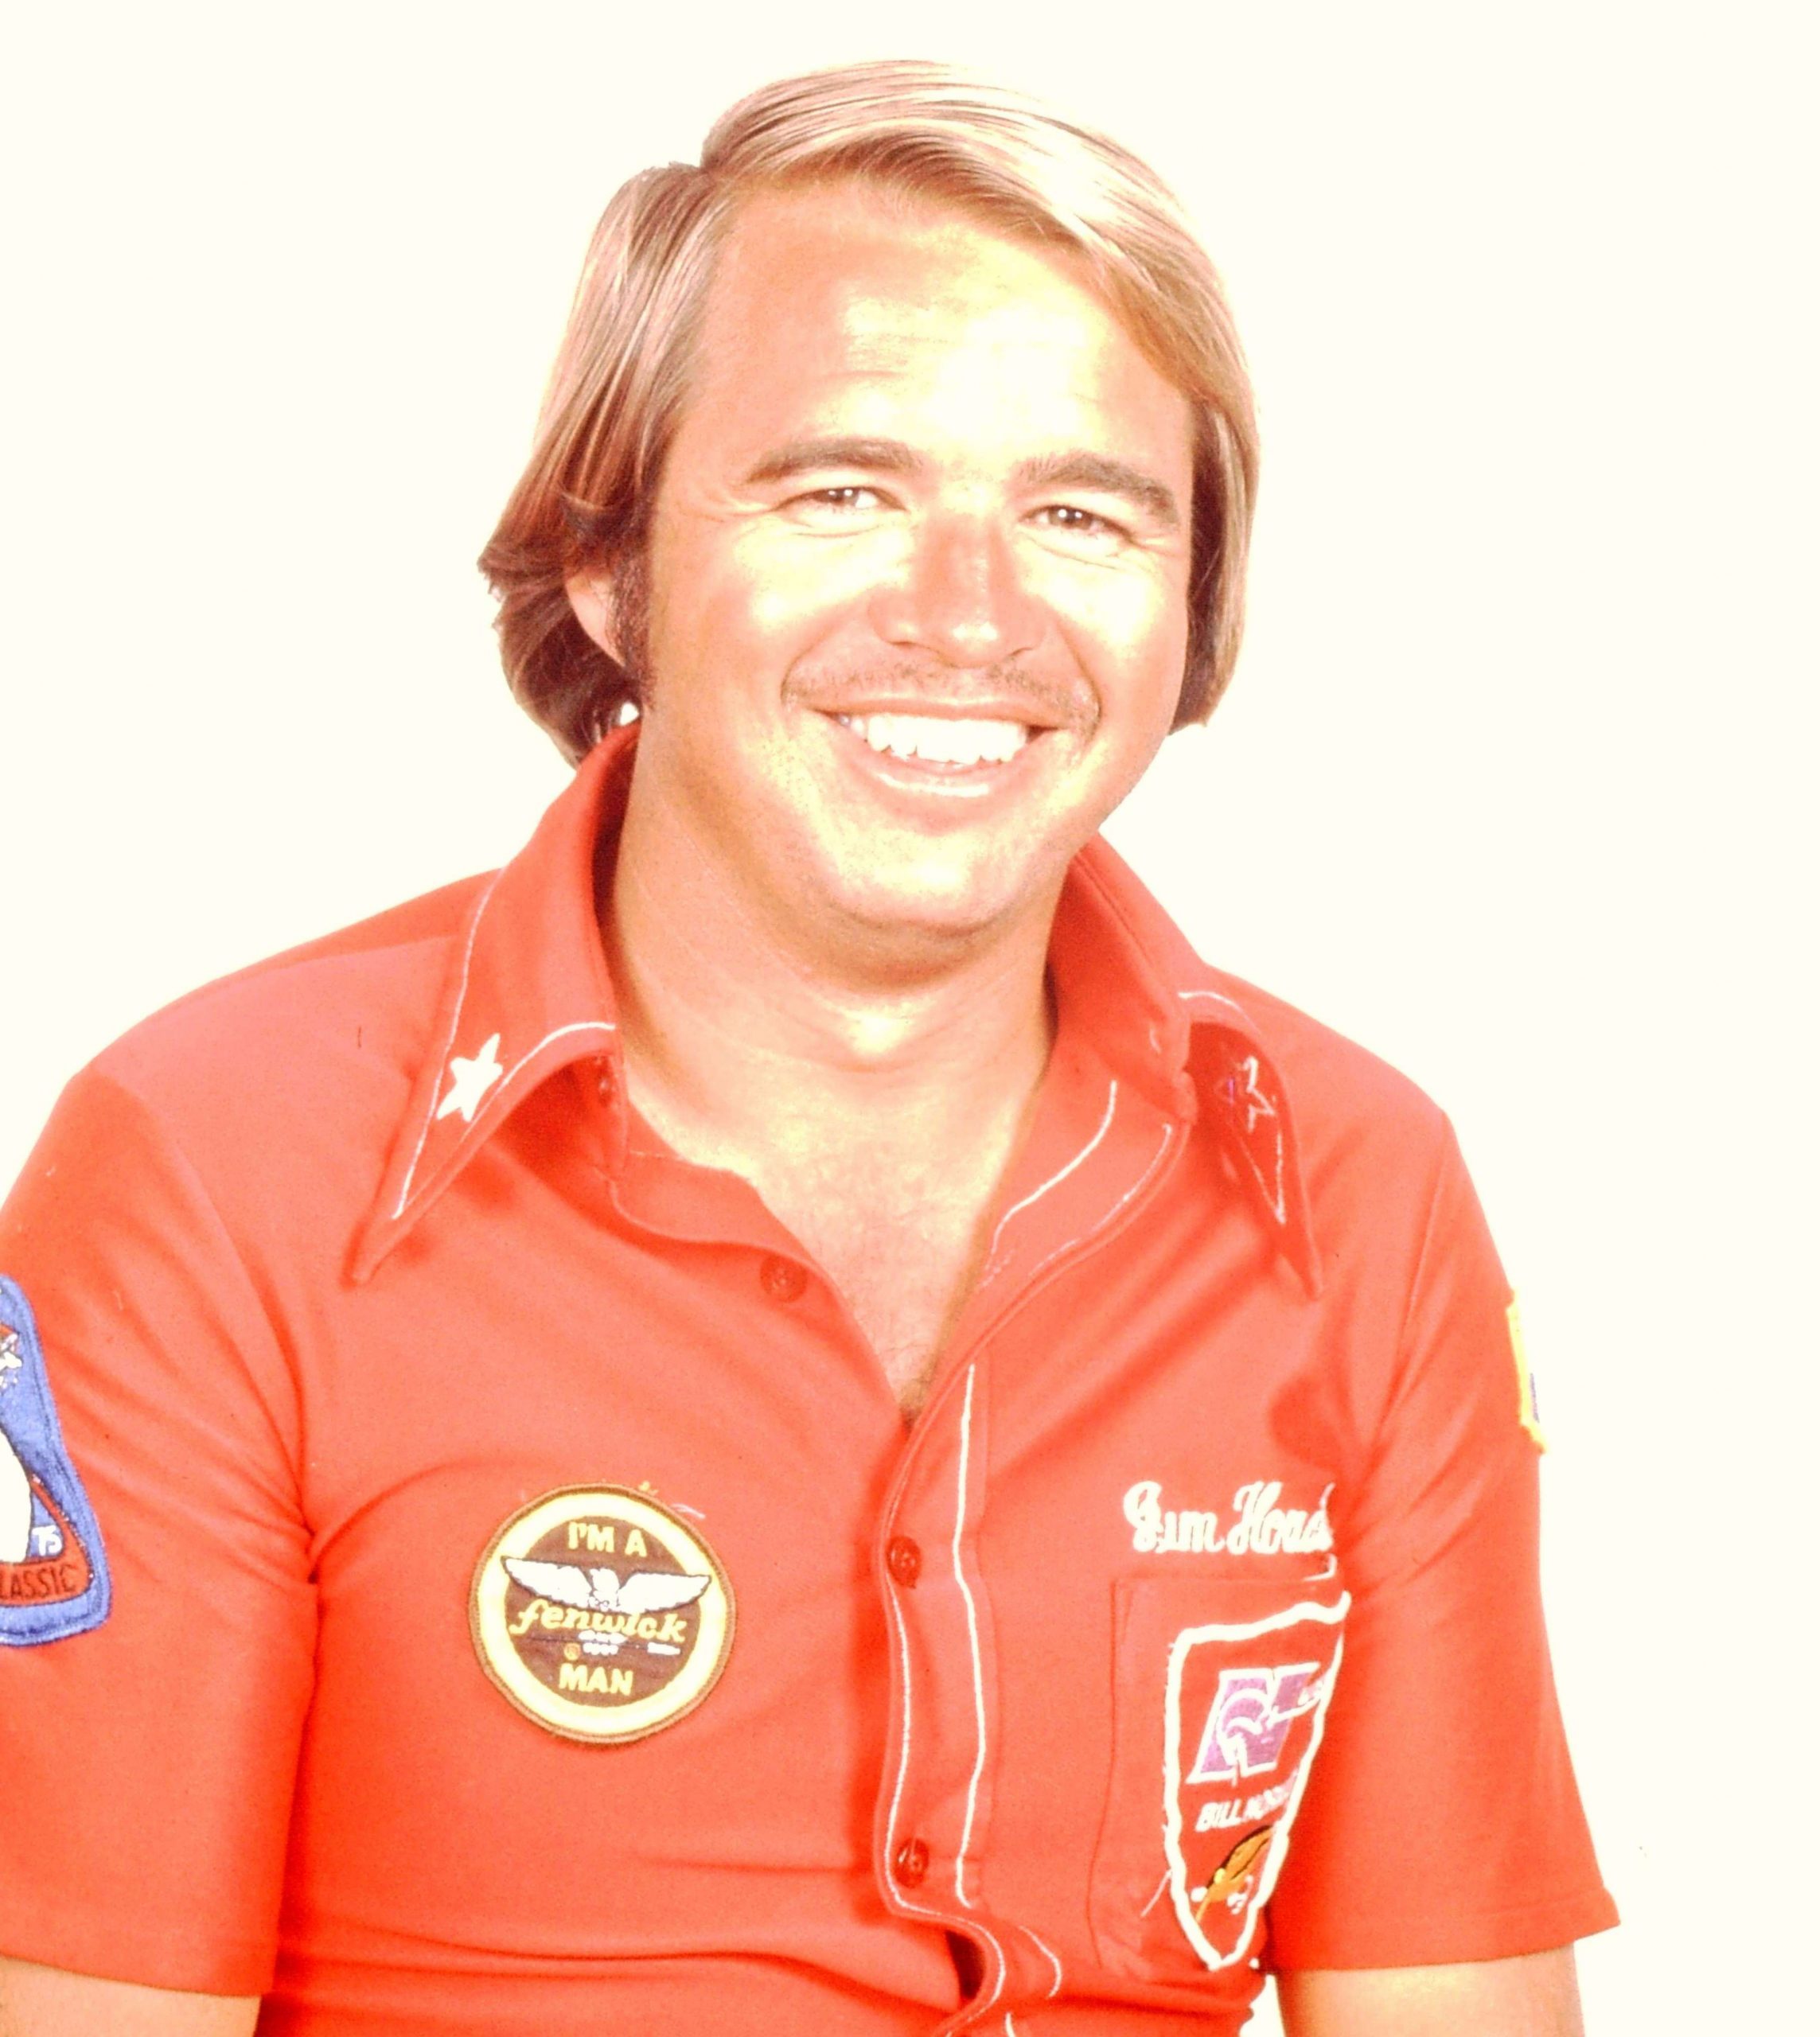 <h4>Jimmy Houston</h4><BR>
Houston began his B.A.S.S. career in 1968, competed in 15 Bassmaster Classics, won 10 national tournaments, and placed among the top money winners in more than 100 national fishing events. Houston is a two-time Bassmaster Angler of the Year (1976, 1986). Jimmy Houston Outdoors debuted in 1976 and today remains one of the most popular outdoor television programs.  
